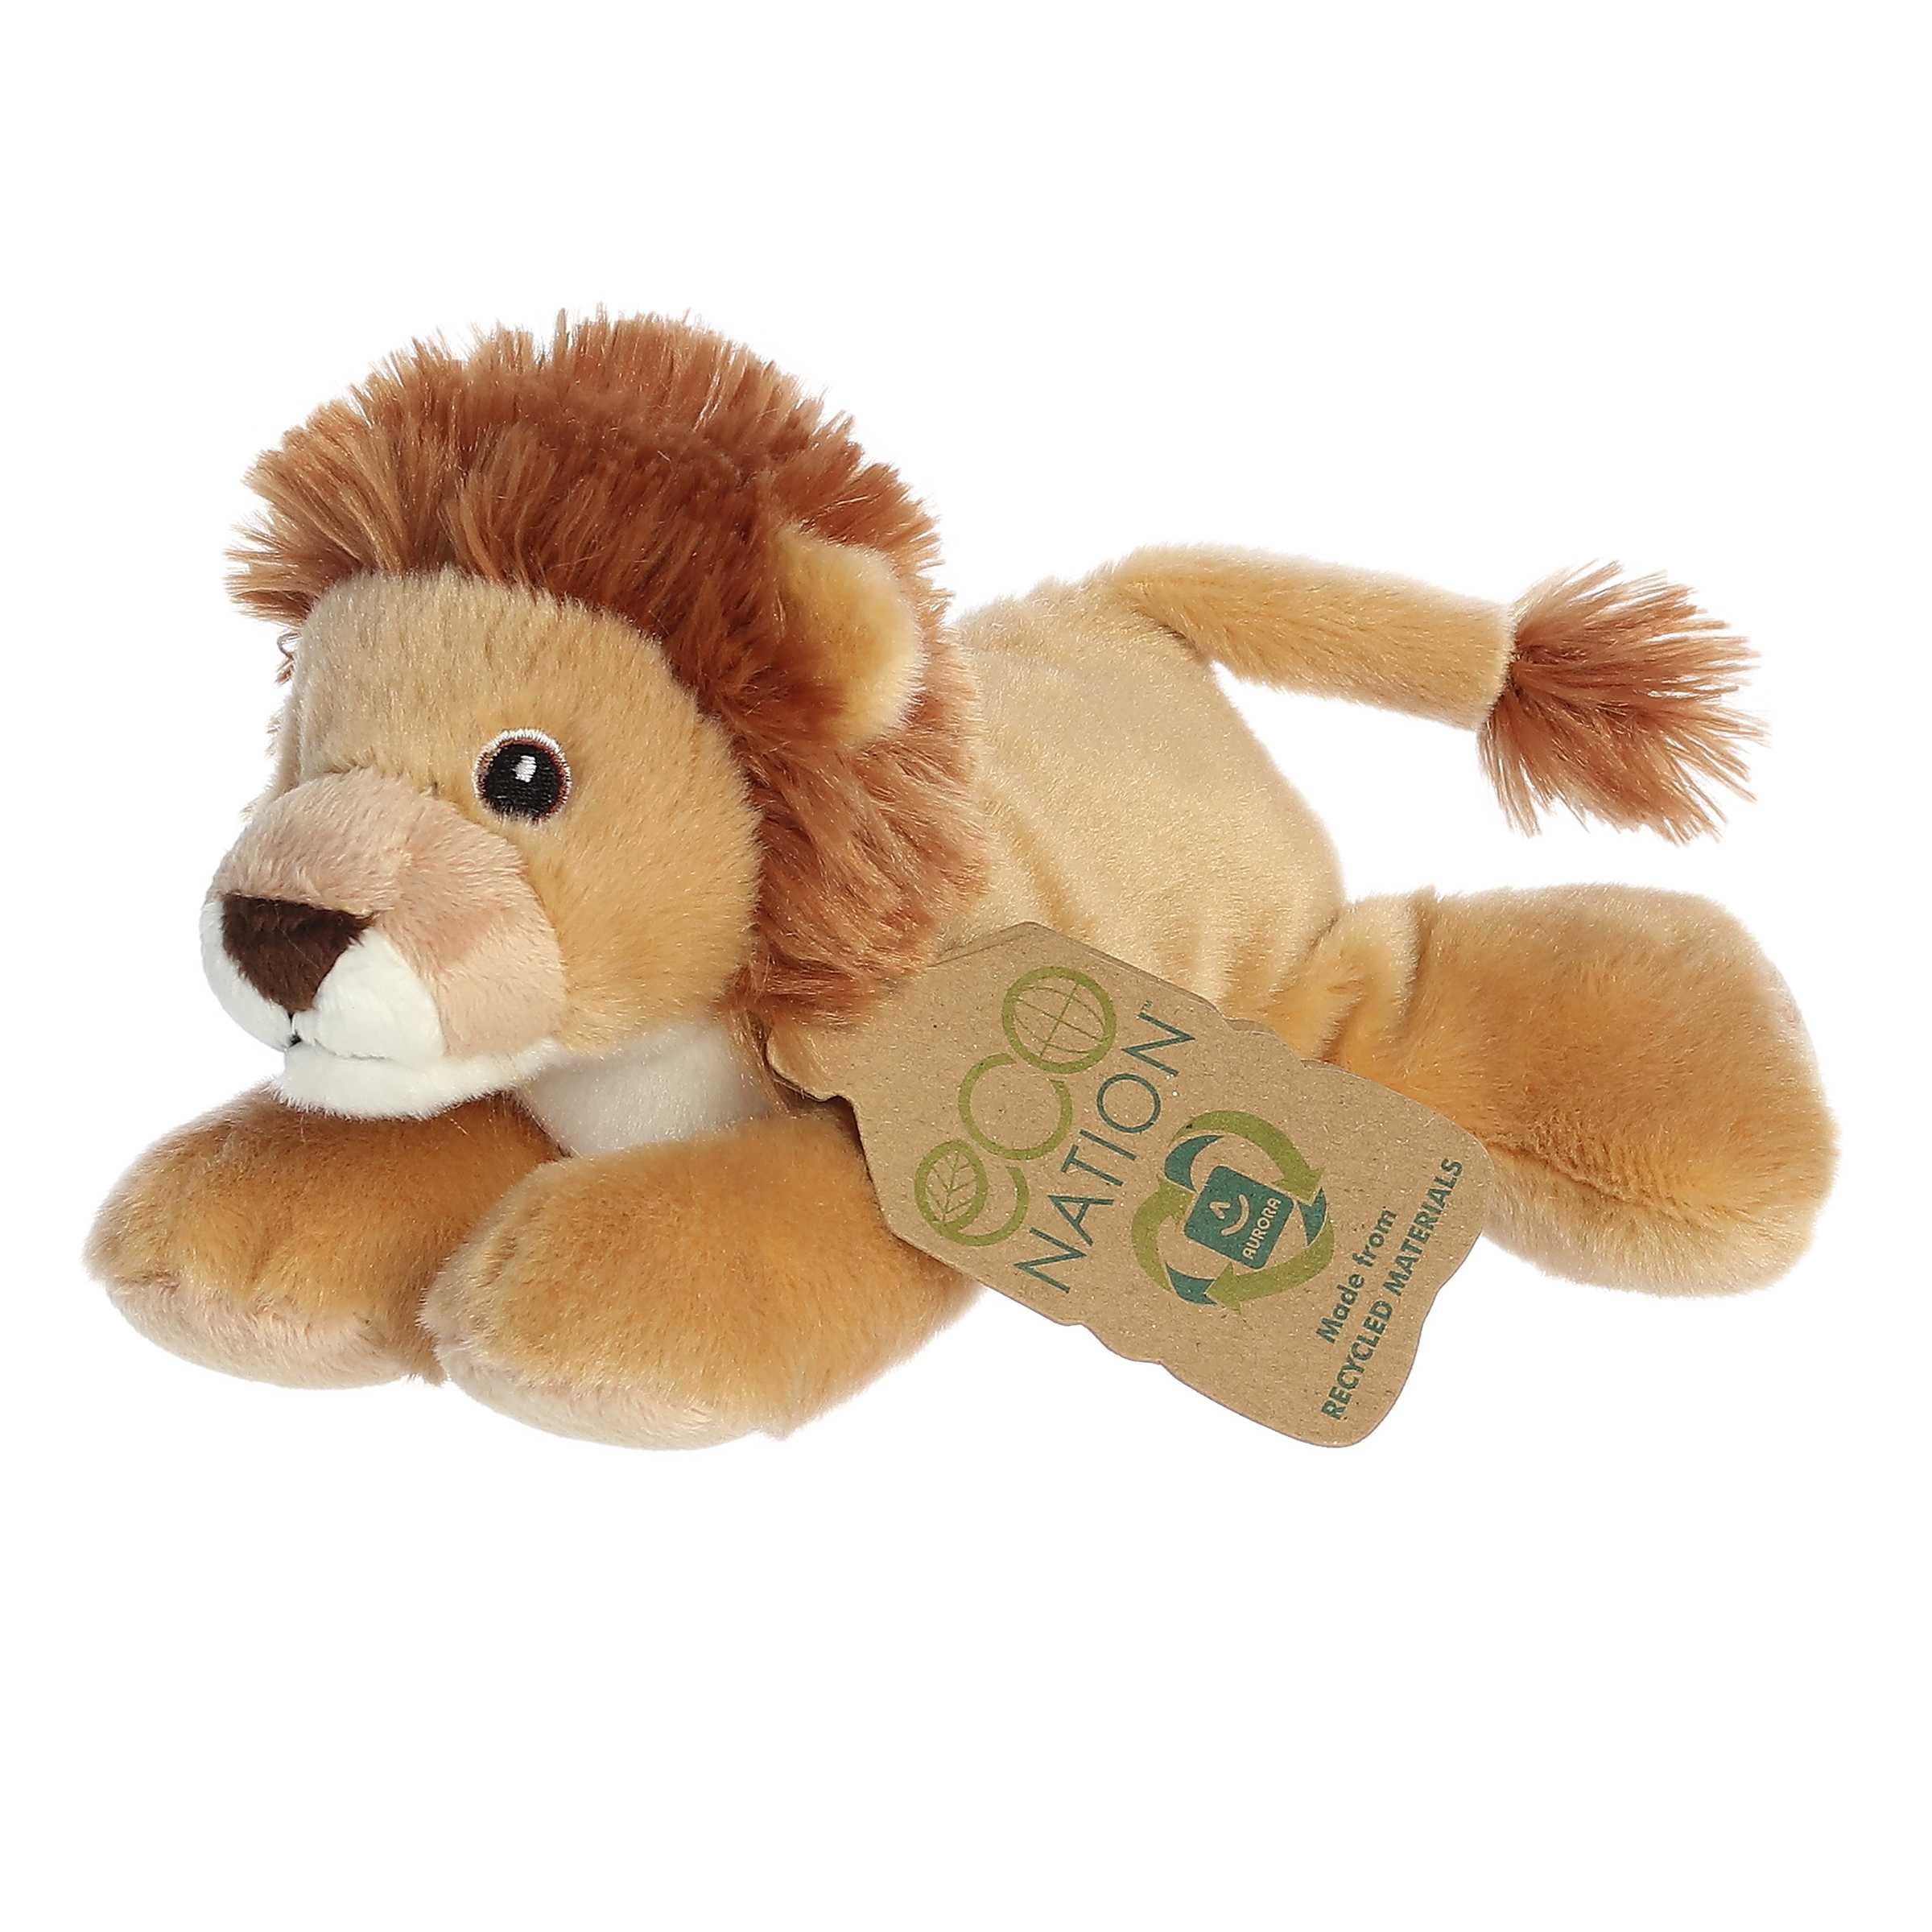 Eco Softie Lion Plush with stately mane and golden fur, featuring 'Eco Nation' tag, symbolizing eco-responsibility.